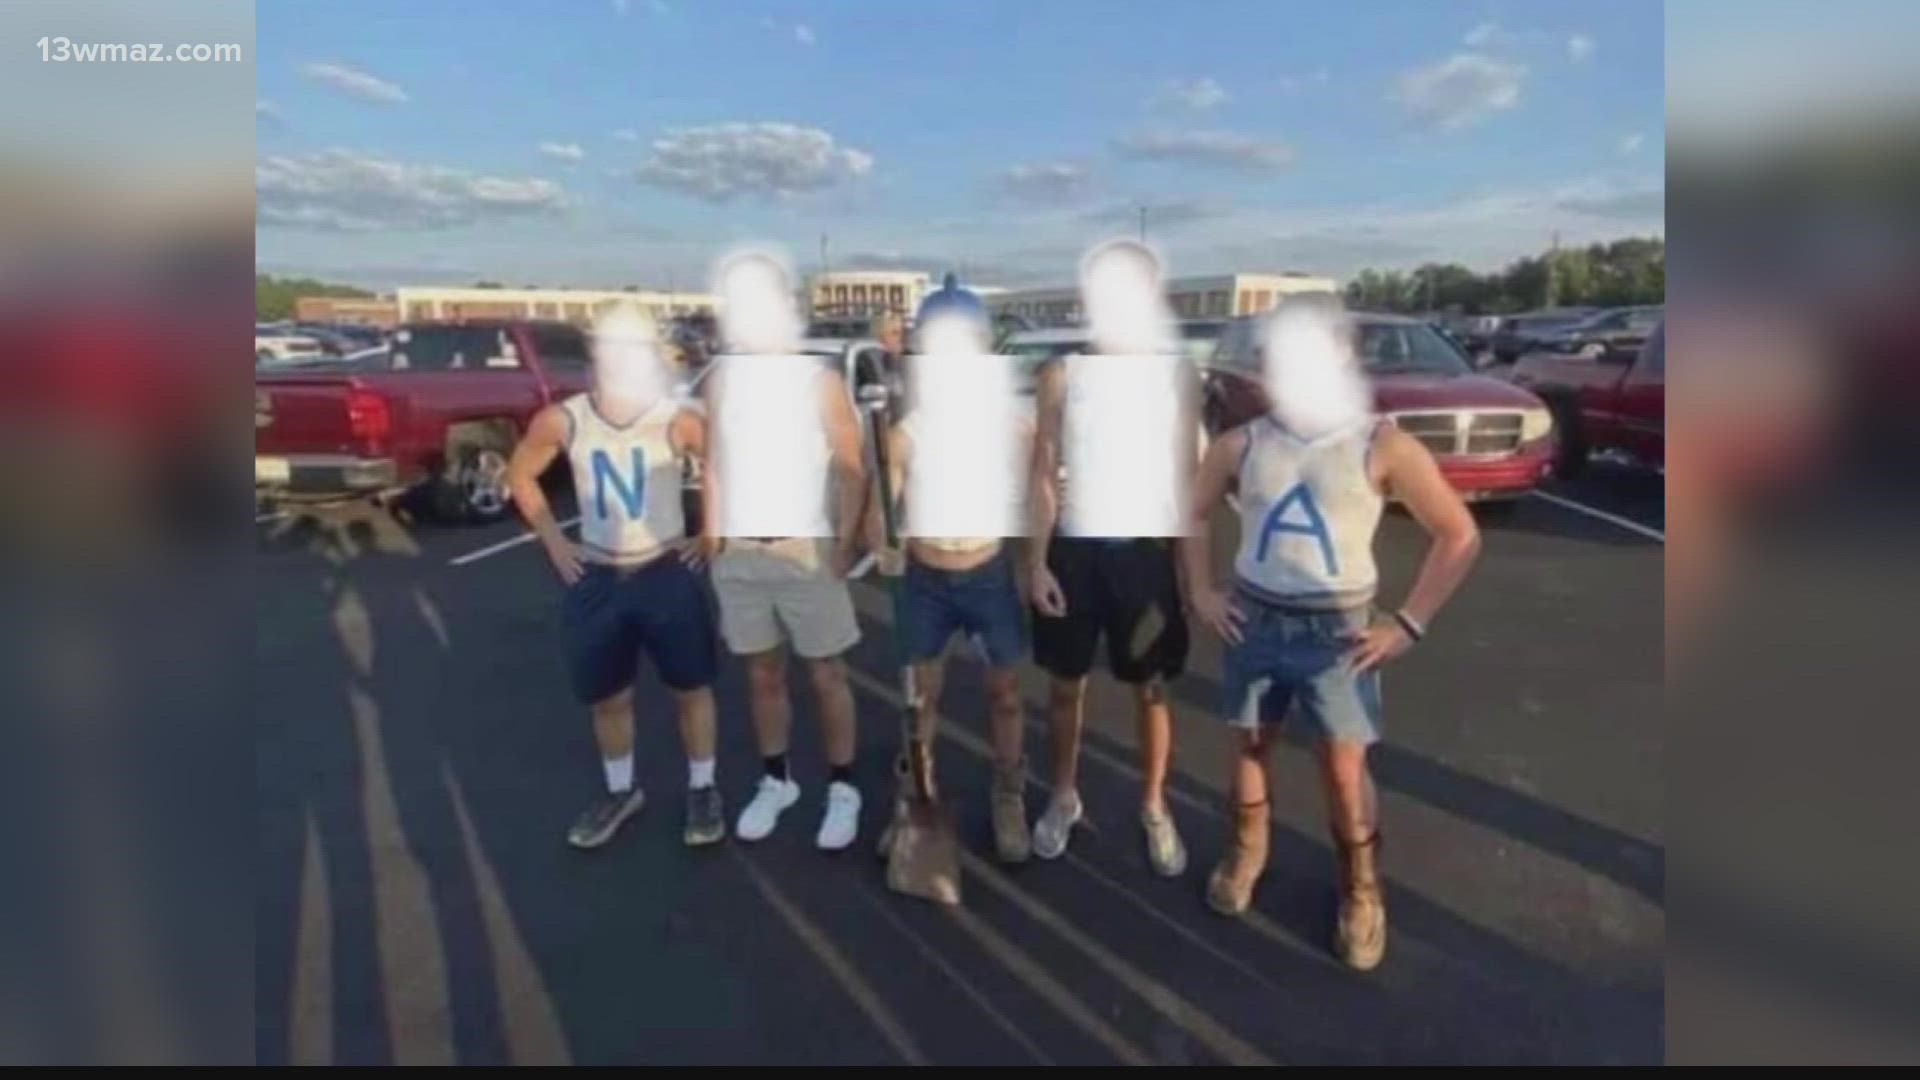 Five white students posted a picture spelling out a racial slur at Friday's West Laurens High School football game, and some people want them to face consequences.